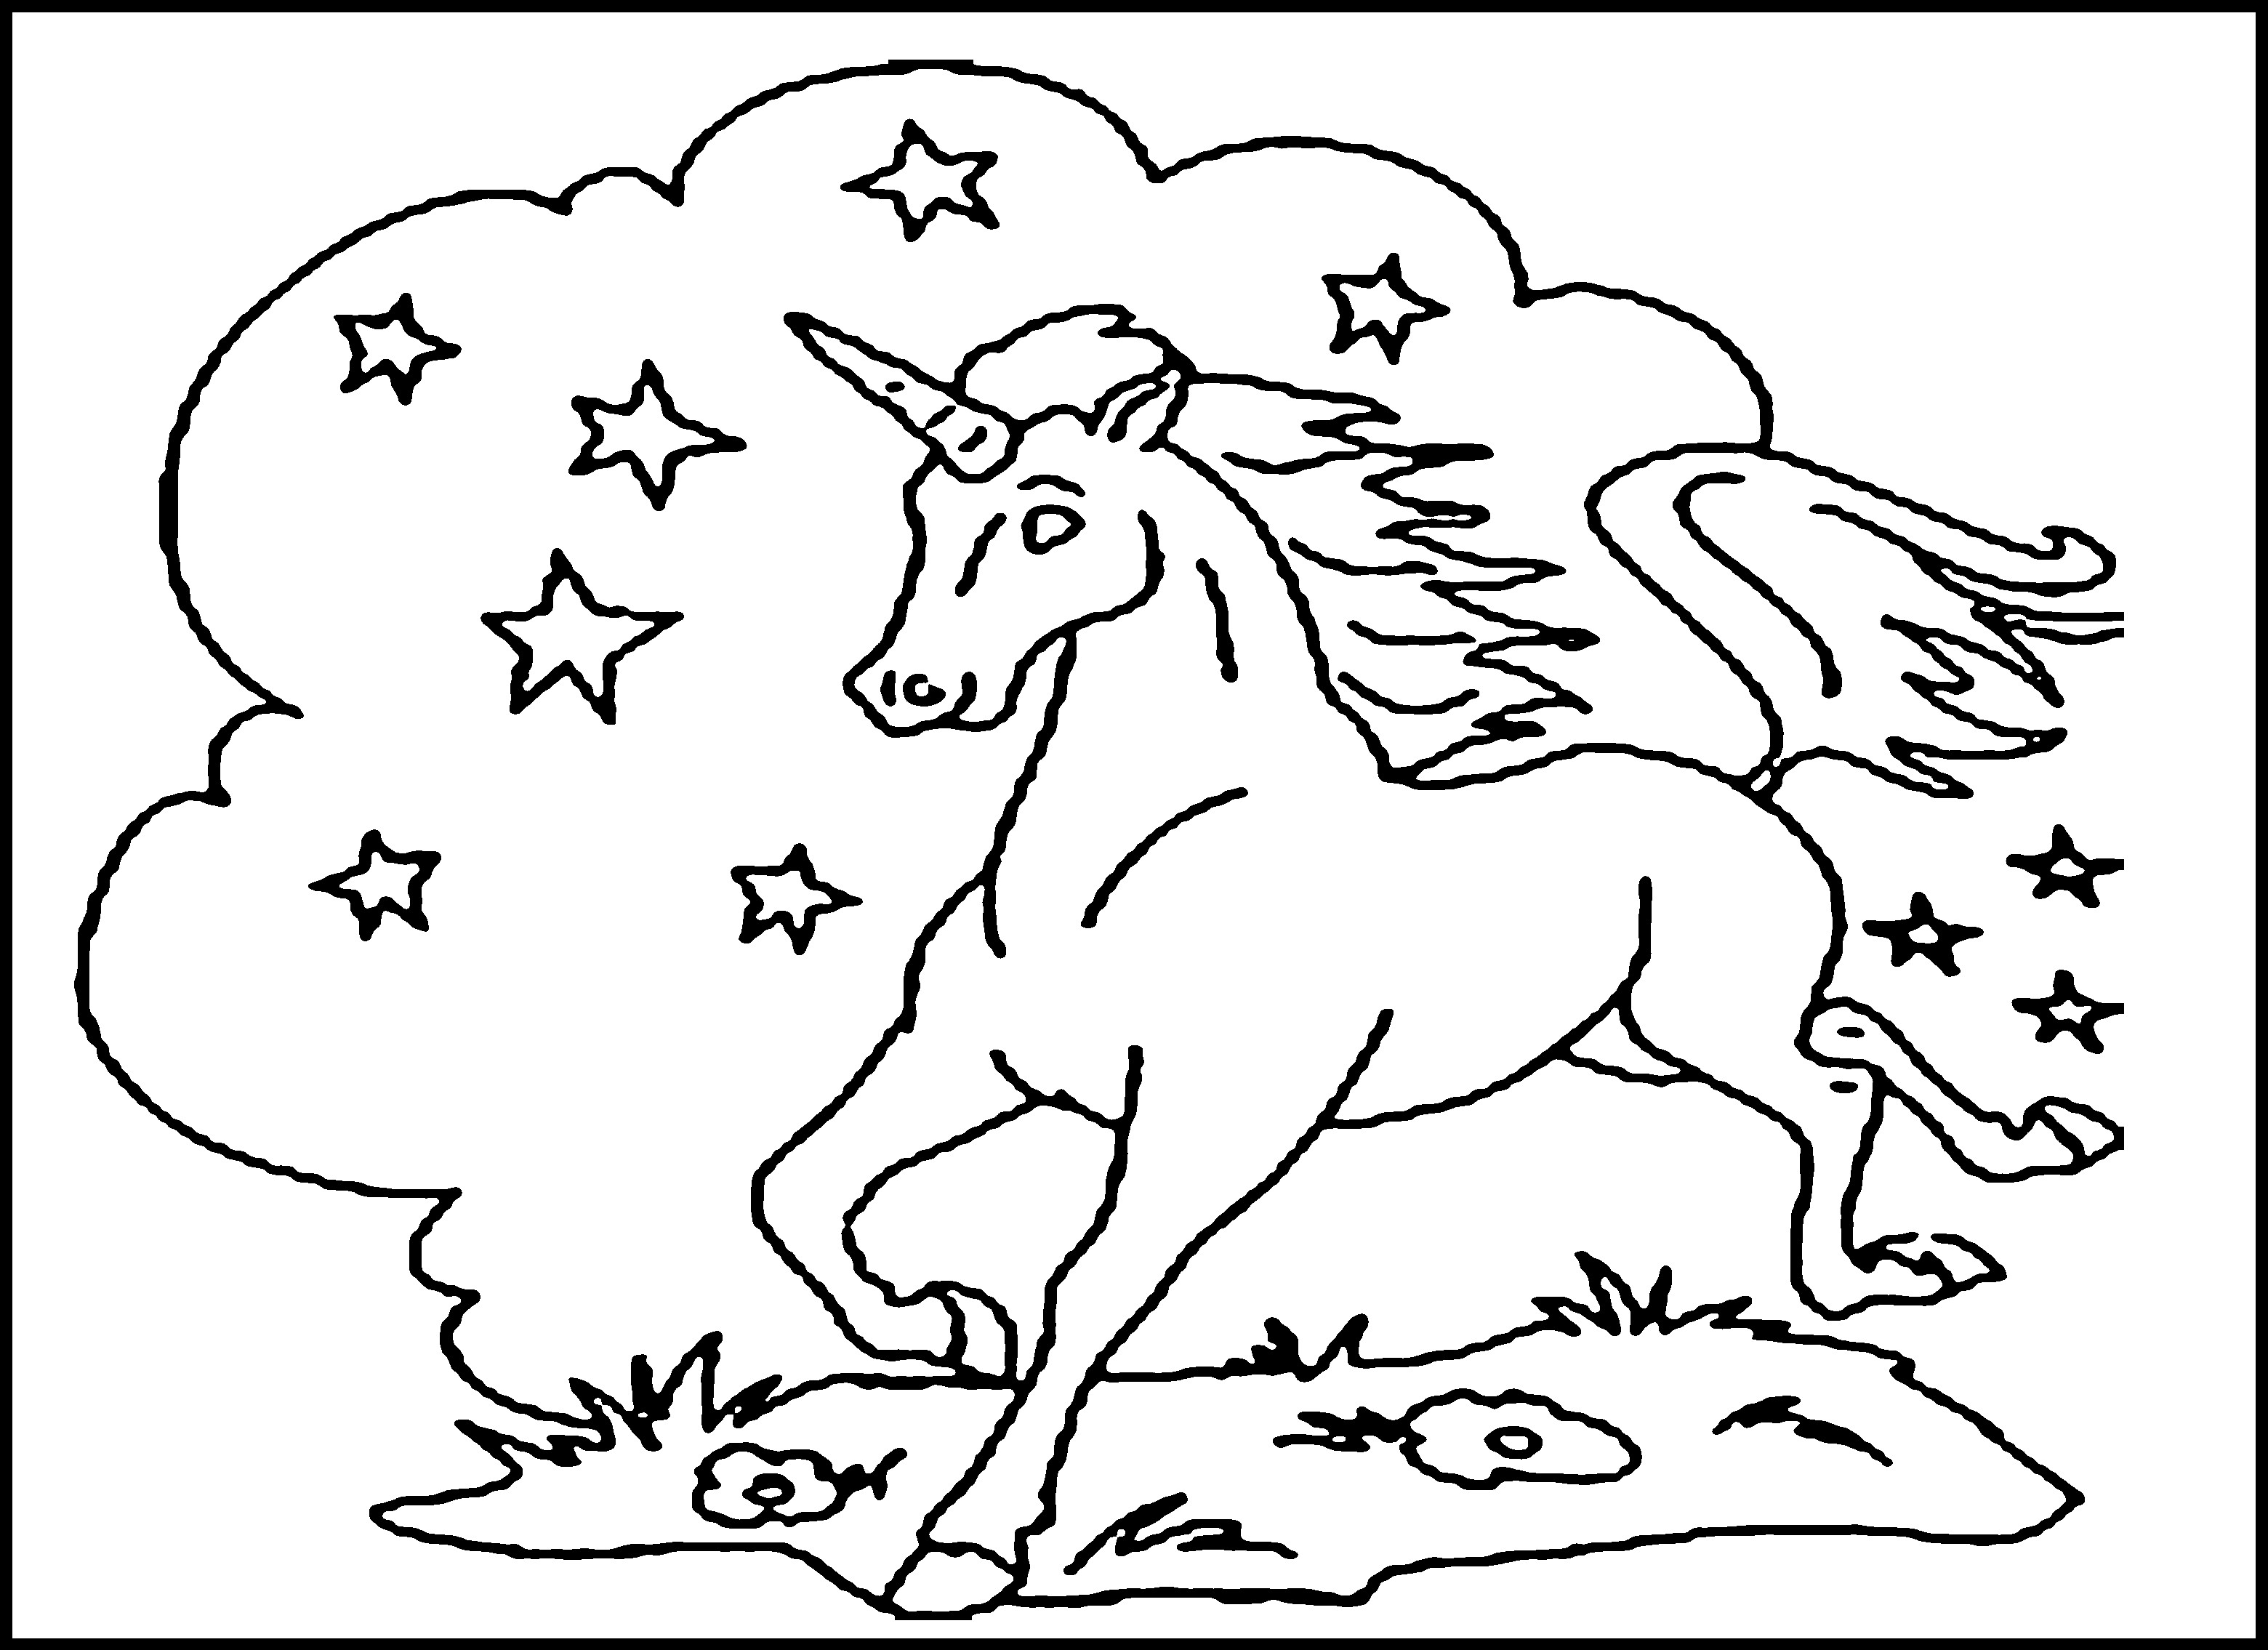 Printable Unicorn Coloring Pages
 Free Printable Unicorn Coloring Pages For Kids